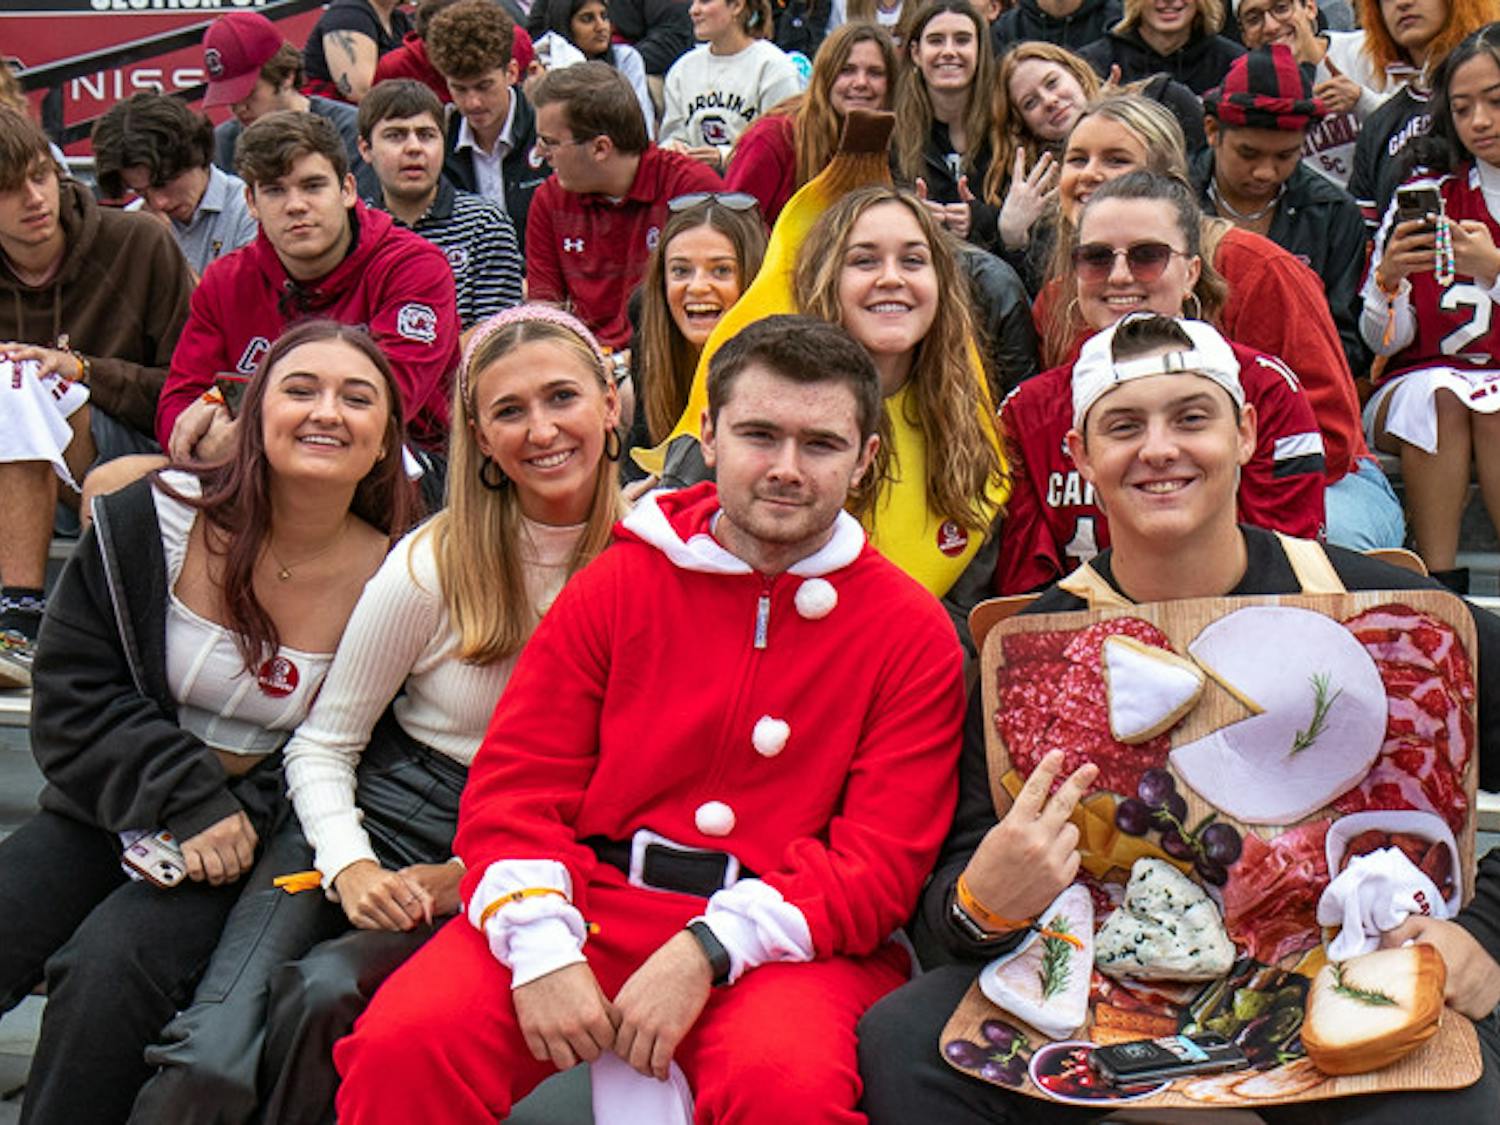 A group of first-year students dress up in Halloween costumes during the South Carolina vs. Missouri game on Oct. 29, 2022. The game fell on the weekend of Halloween, prompting many students and fans to dress up.